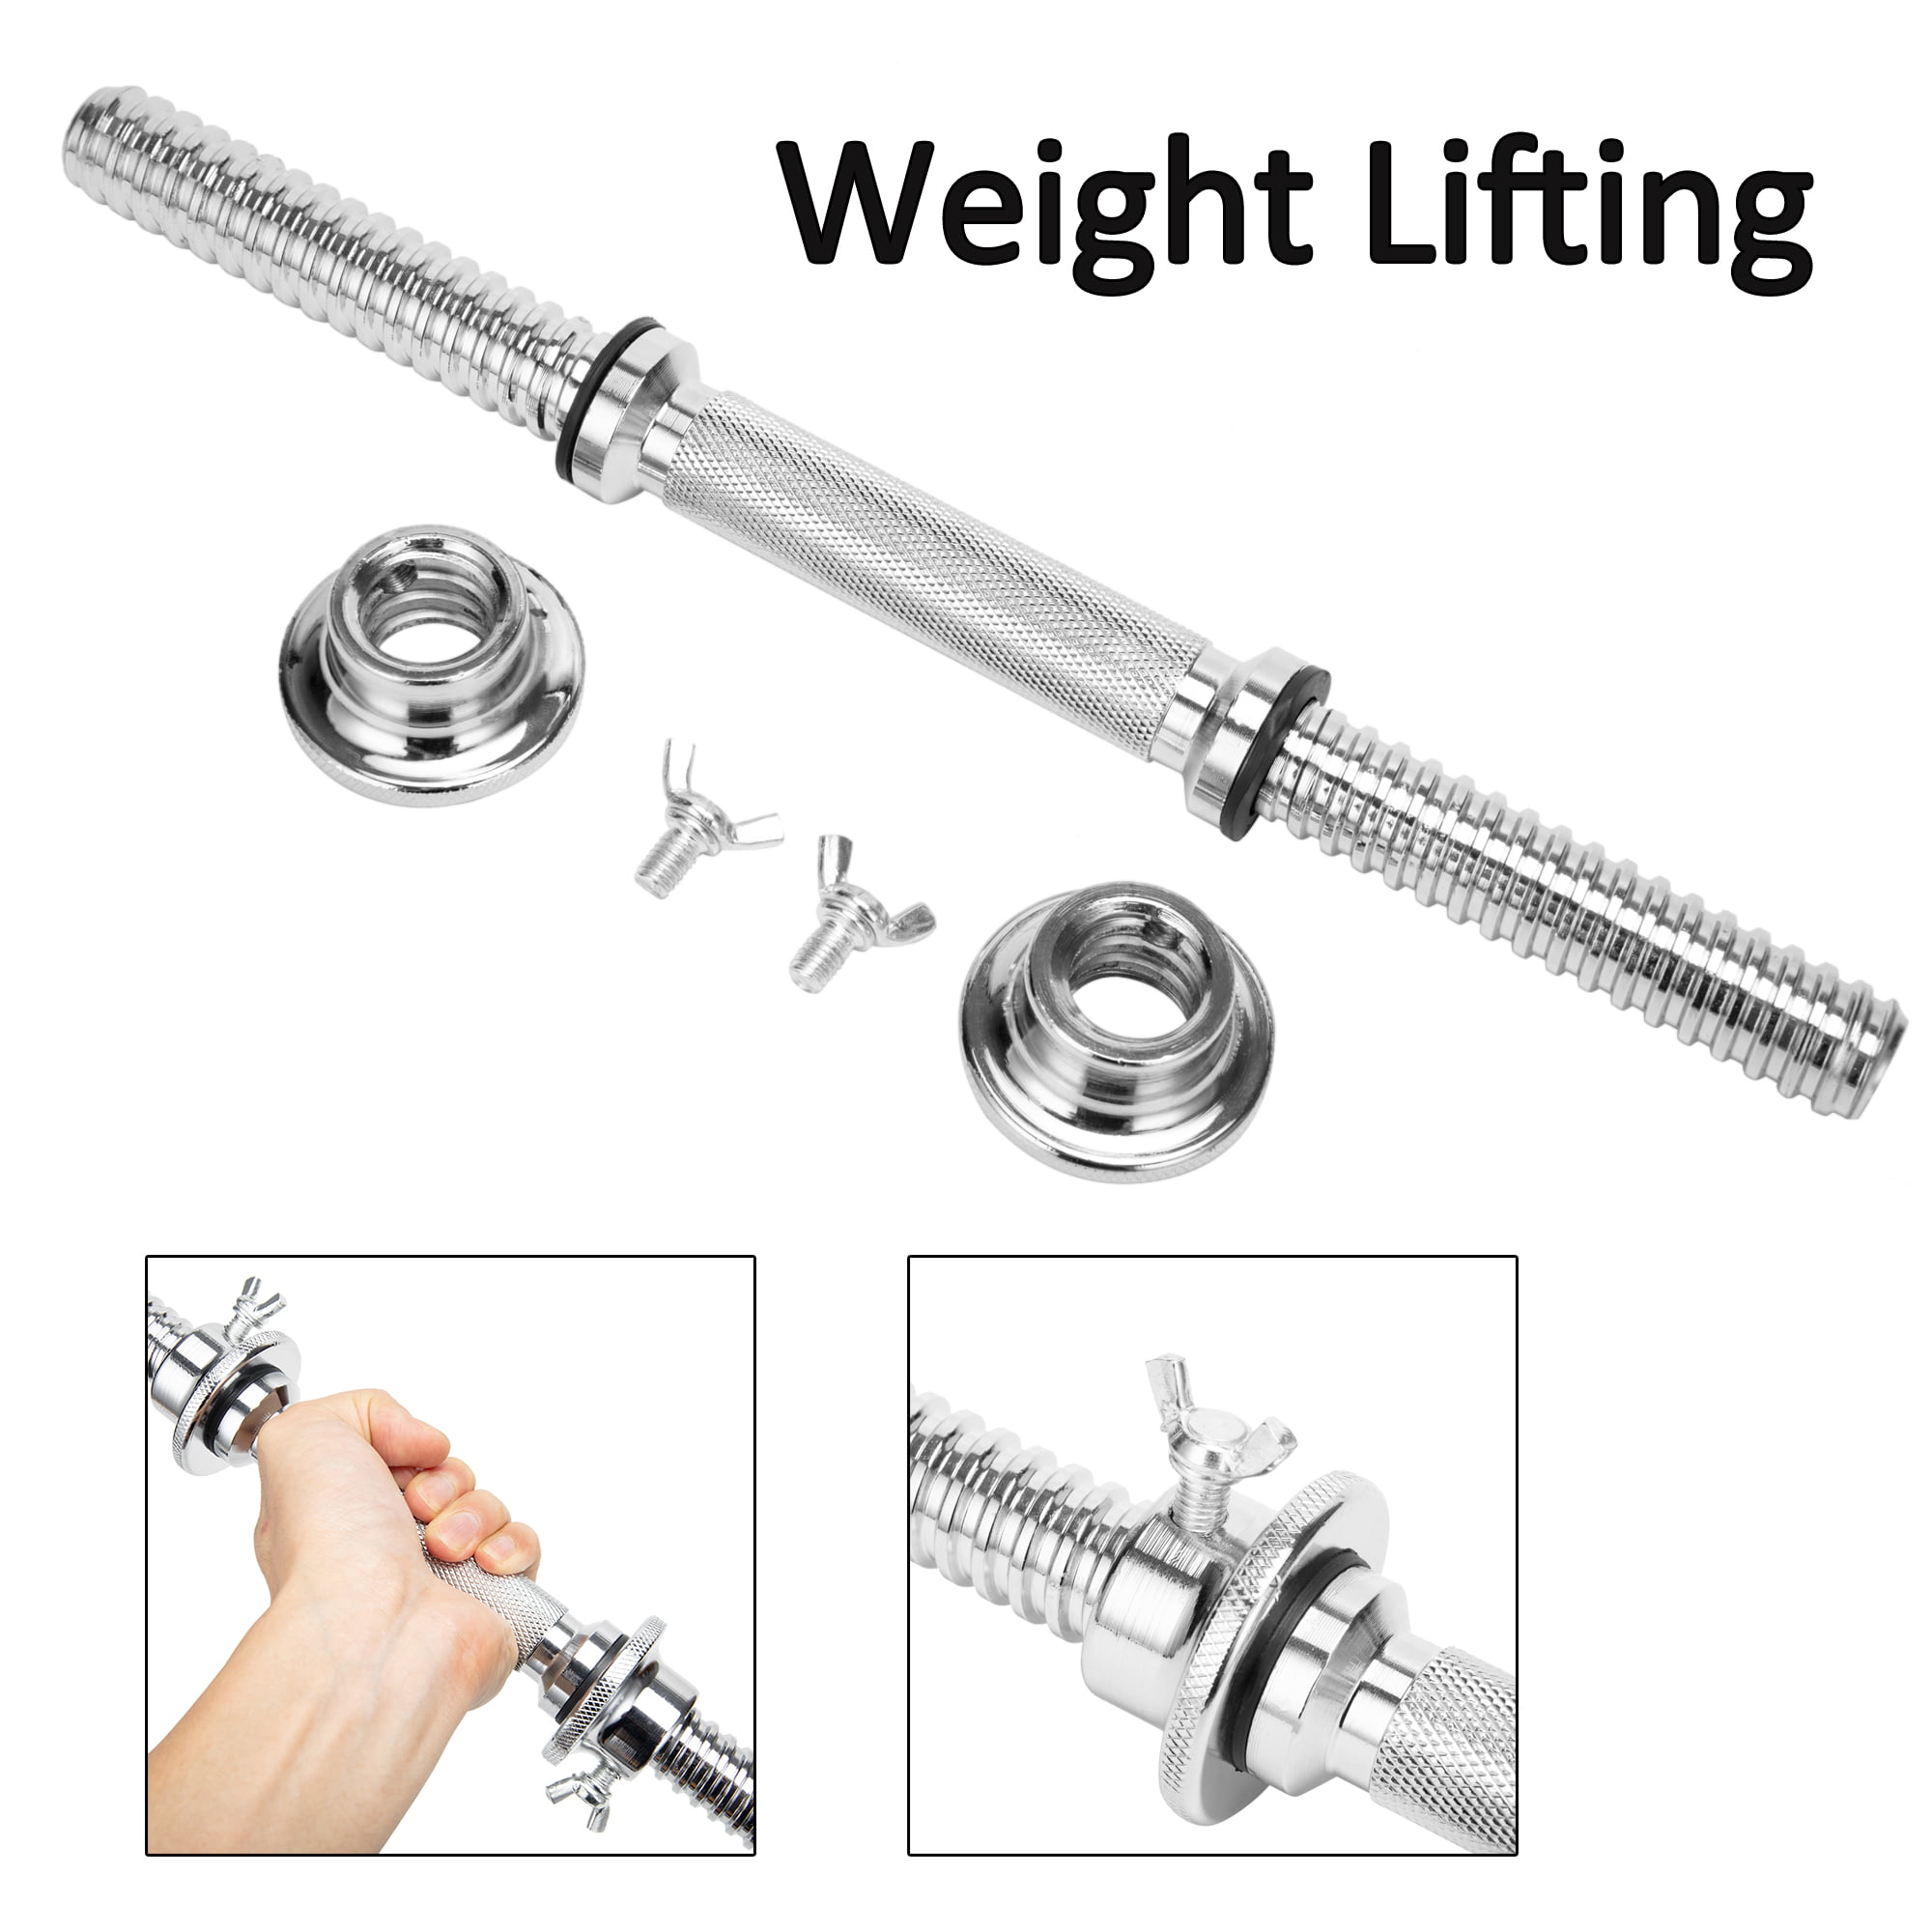 FADACAI 1 Pc Weight Lifting Standard Barbell Bar Solid Steel Dumbbell accessory 